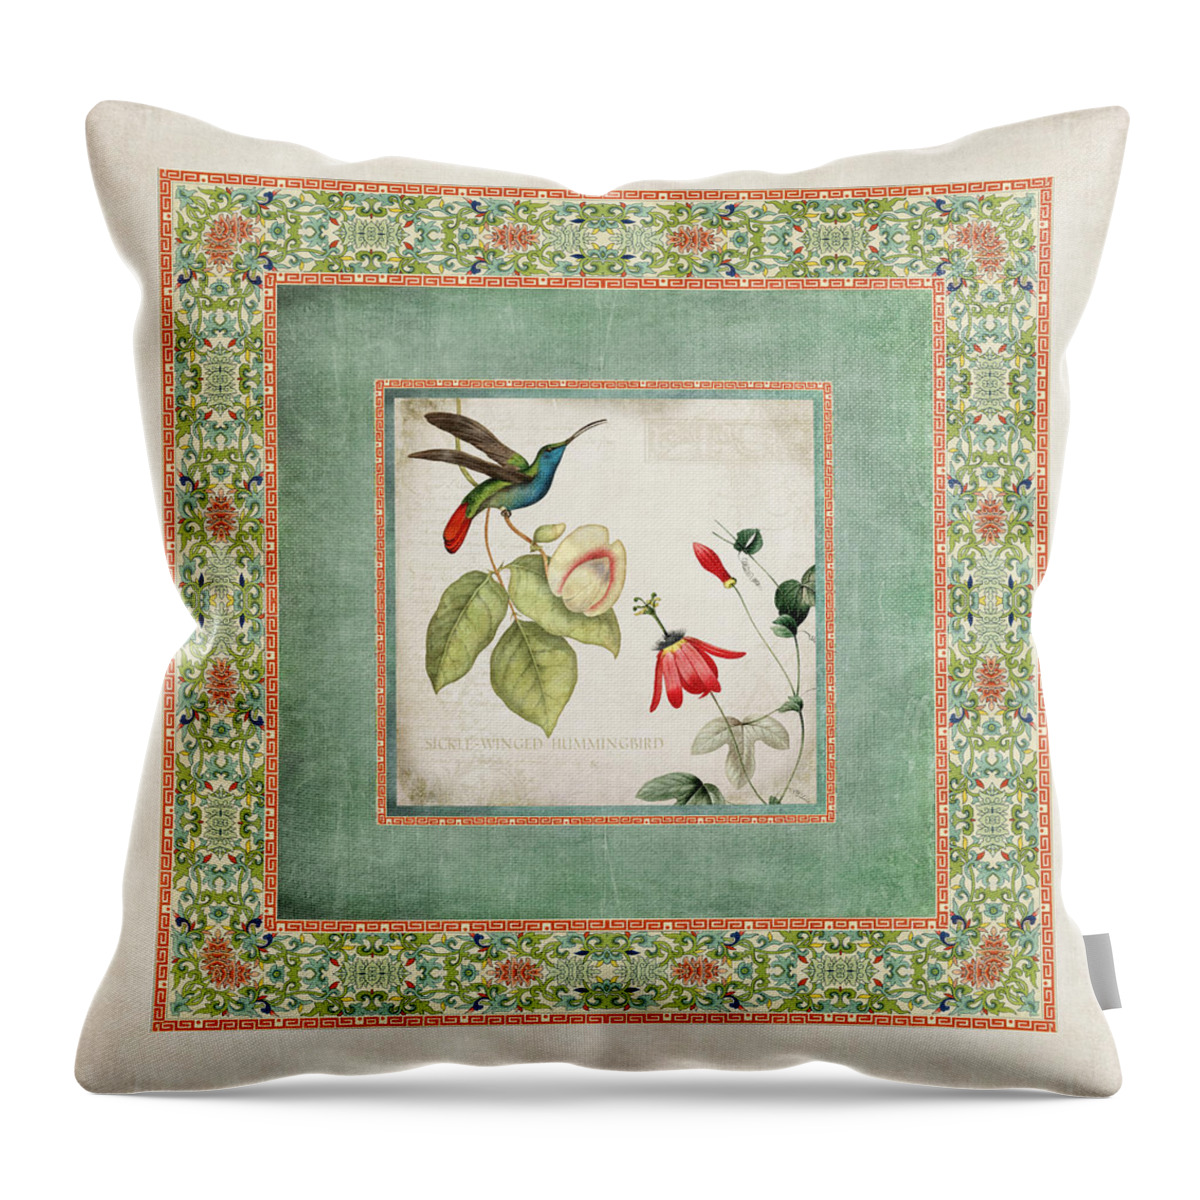 Chinese Ornamental Paper Throw Pillow featuring the digital art Chinoiserie Vintage Hummingbirds n Flowers 2 by Audrey Jeanne Roberts